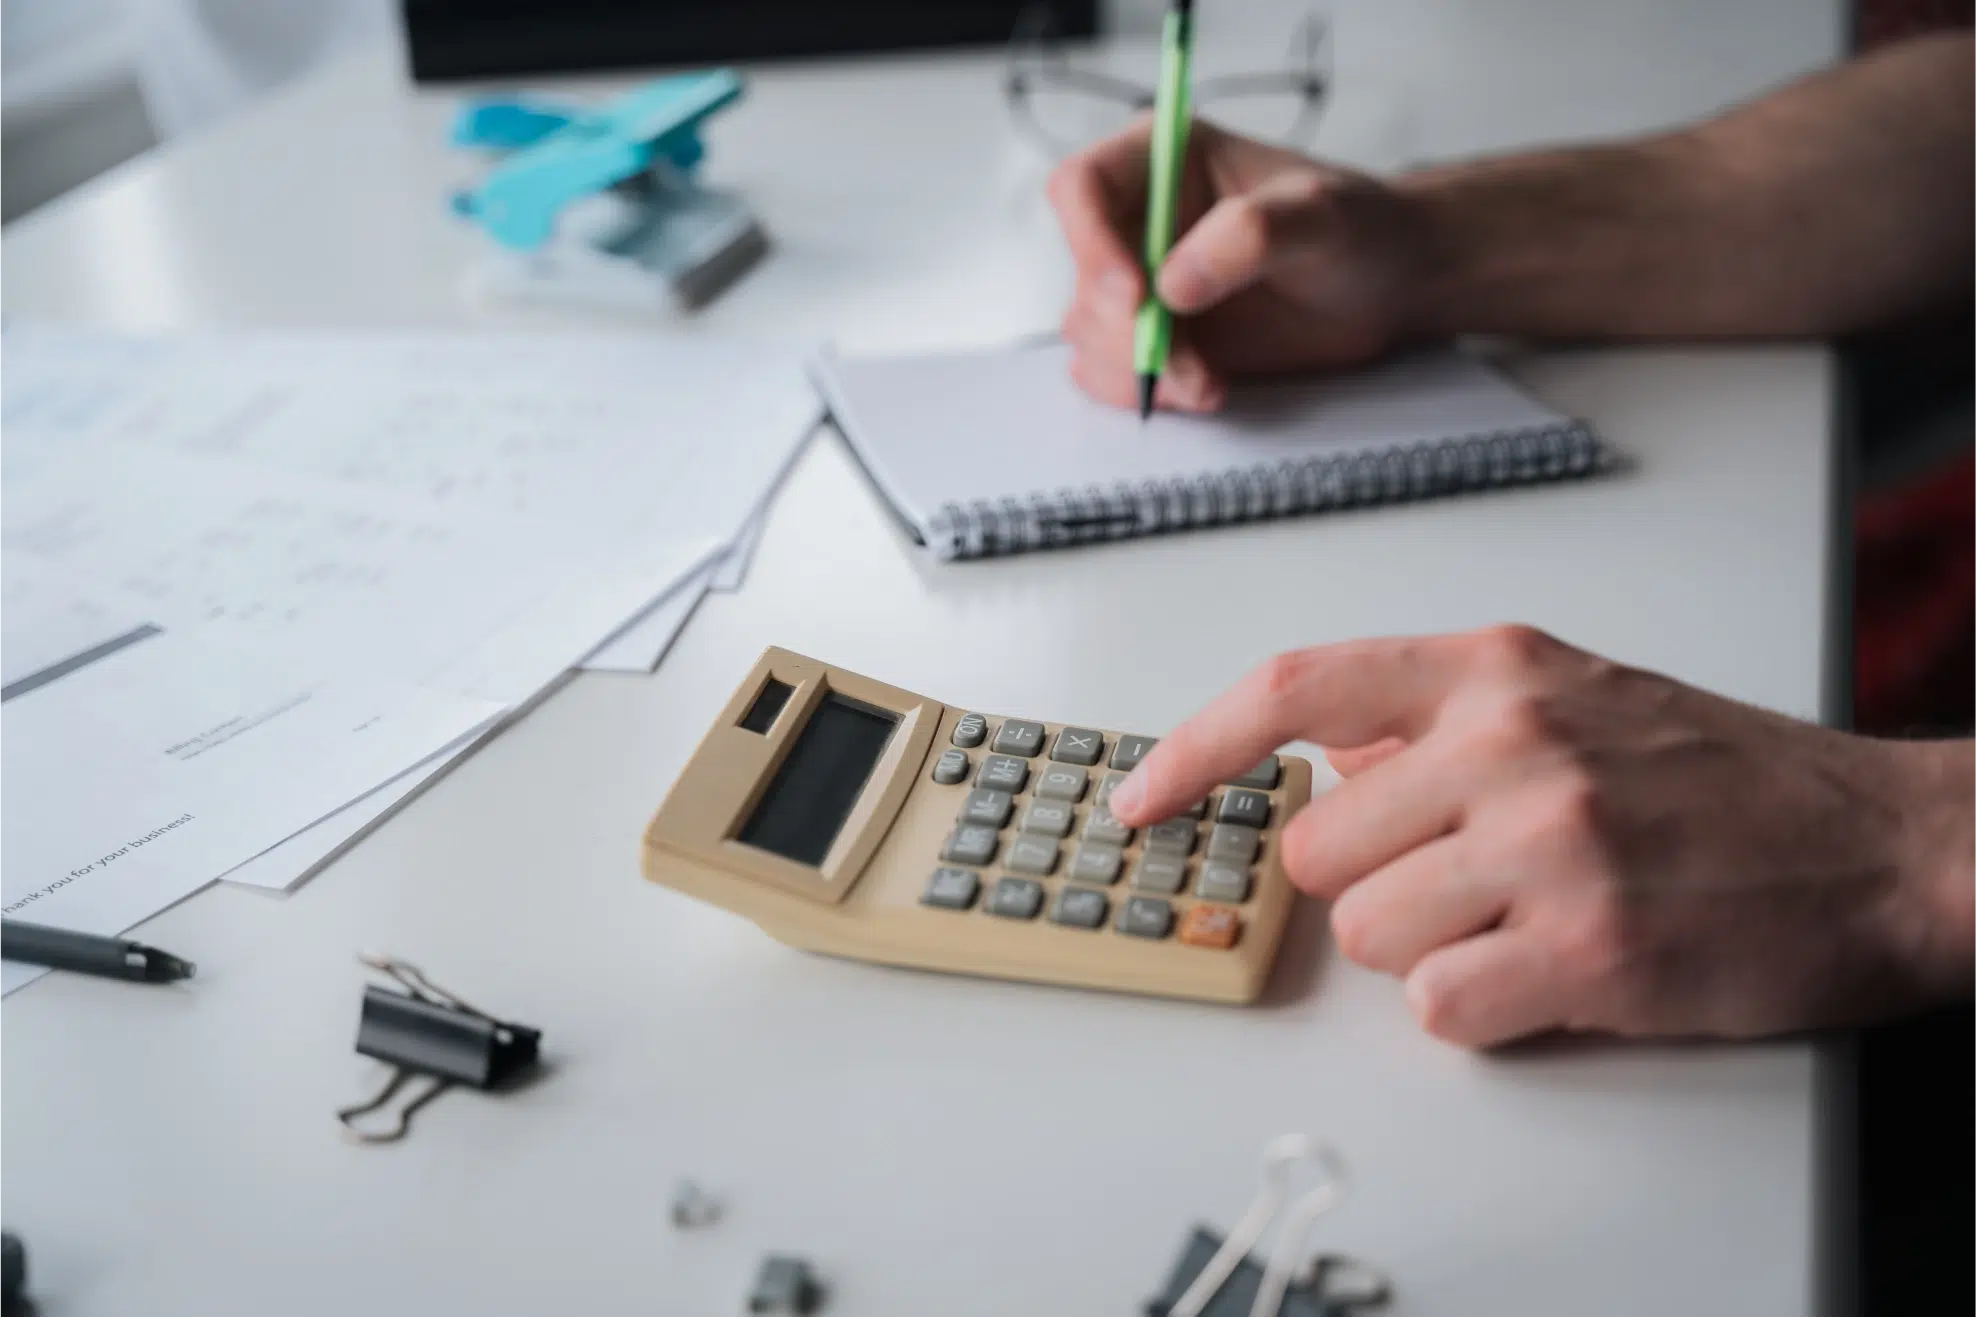 An image of someone performing calculations with a calculator